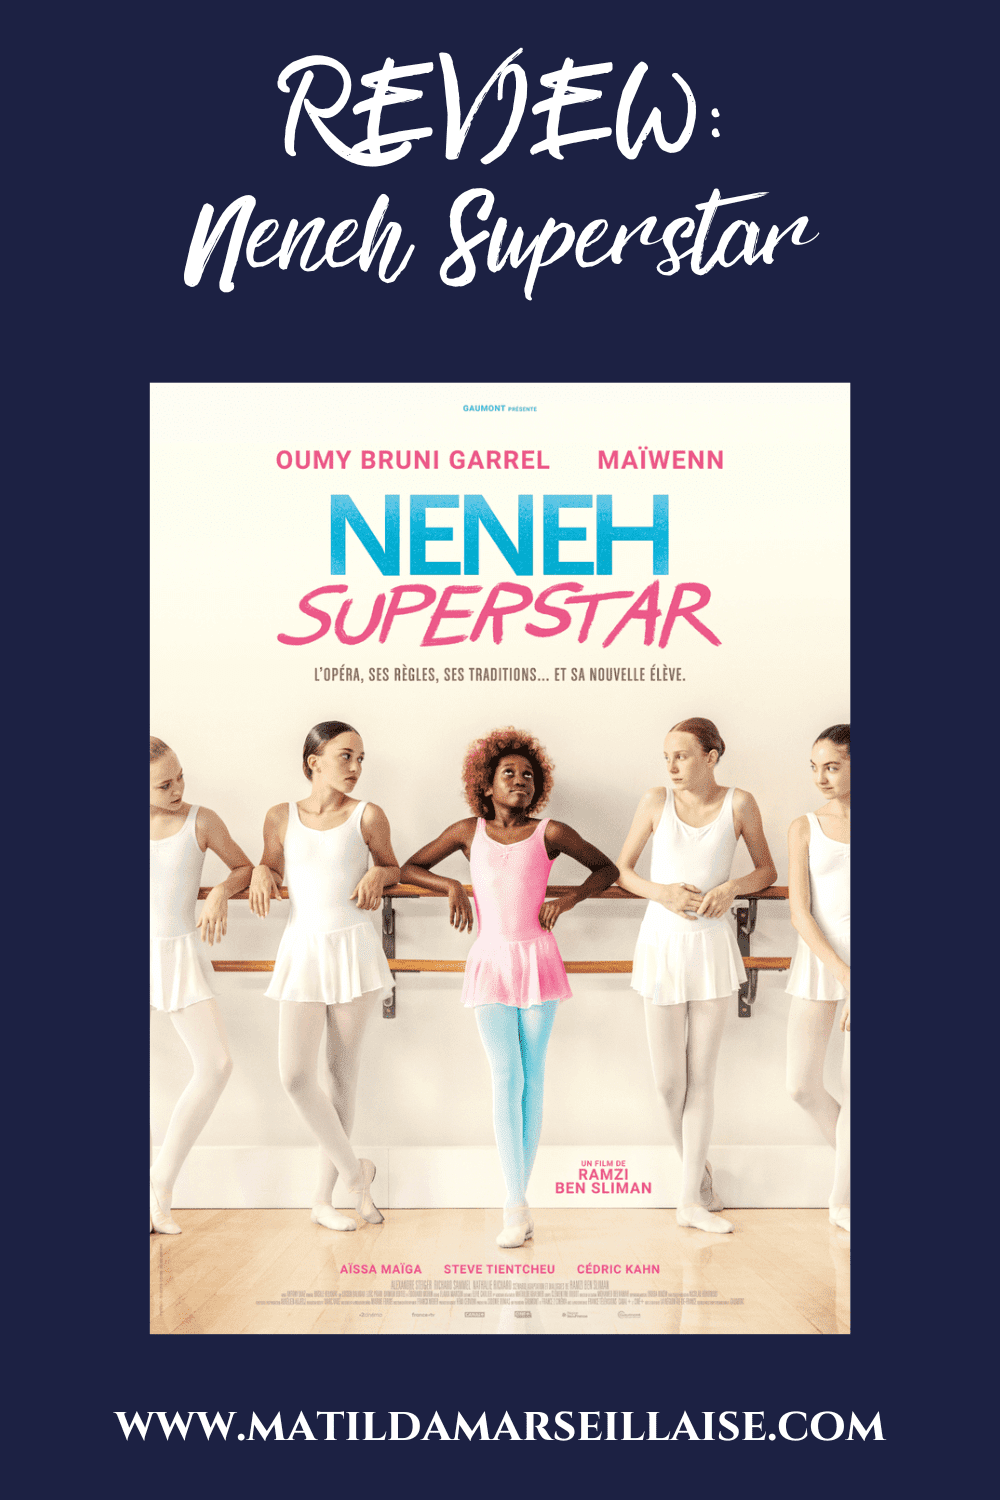 Neneh Superstar is a film about fighting for your dreams no matter what stands in the way